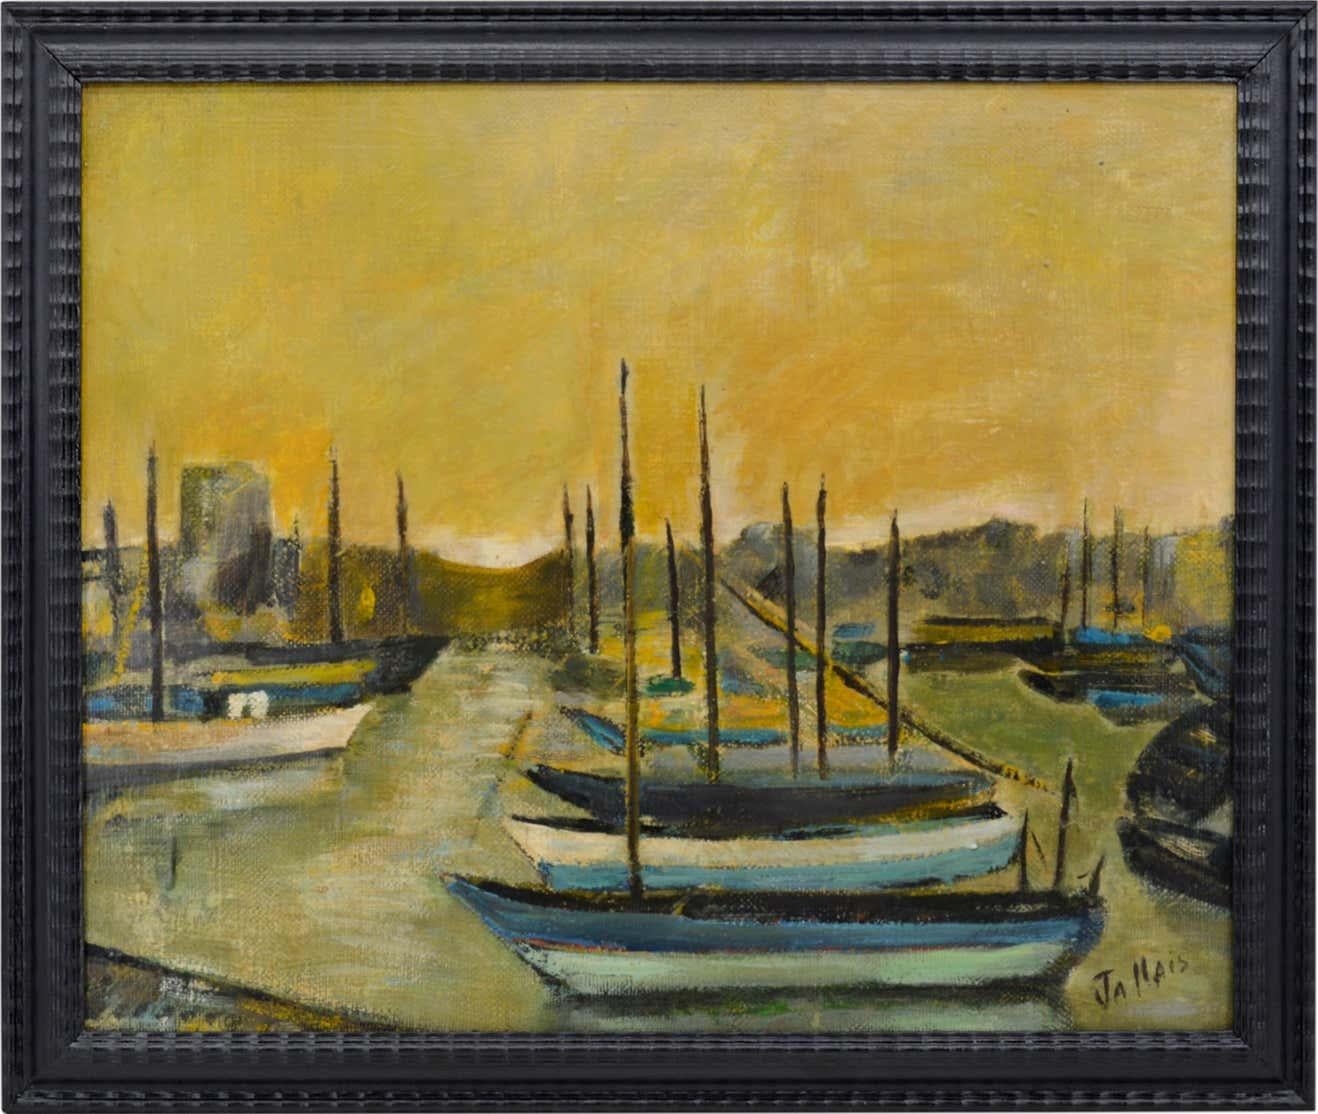 Oil on Canvas by Jallais, Boats in Port, 1960s